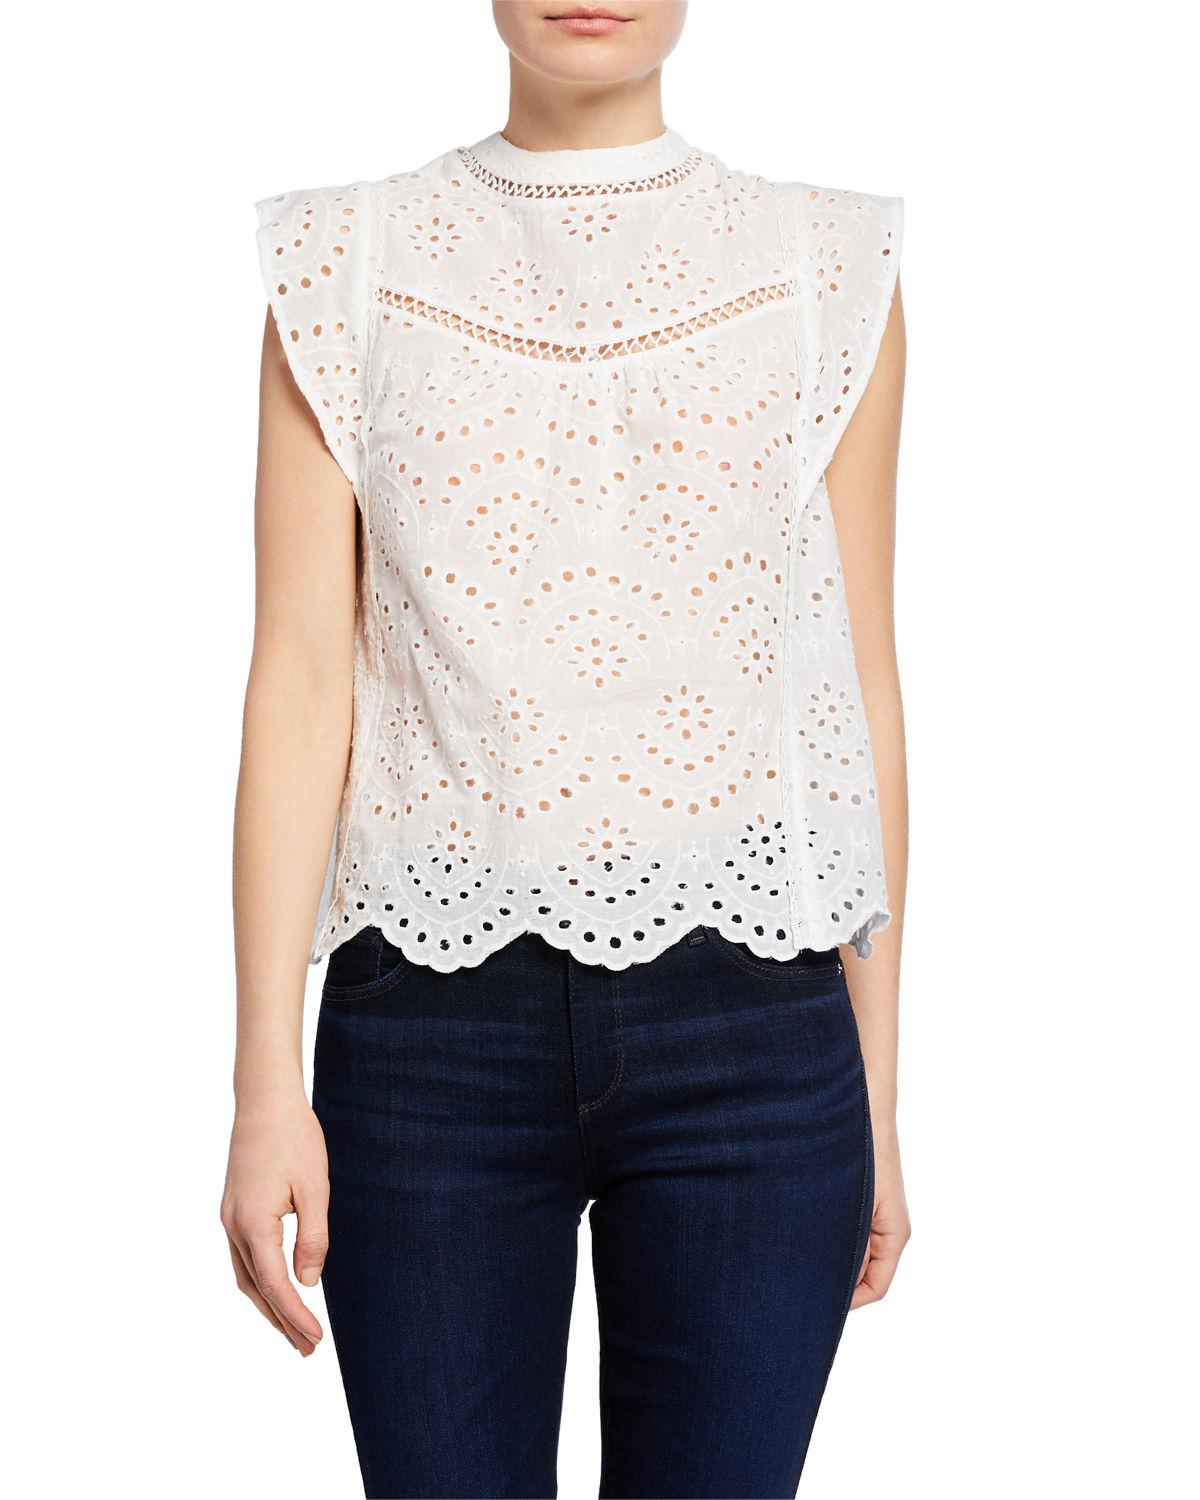 7 For All Mankind Lace Crewneck Sleeveless Eyelet Crop Top in White - Lyst